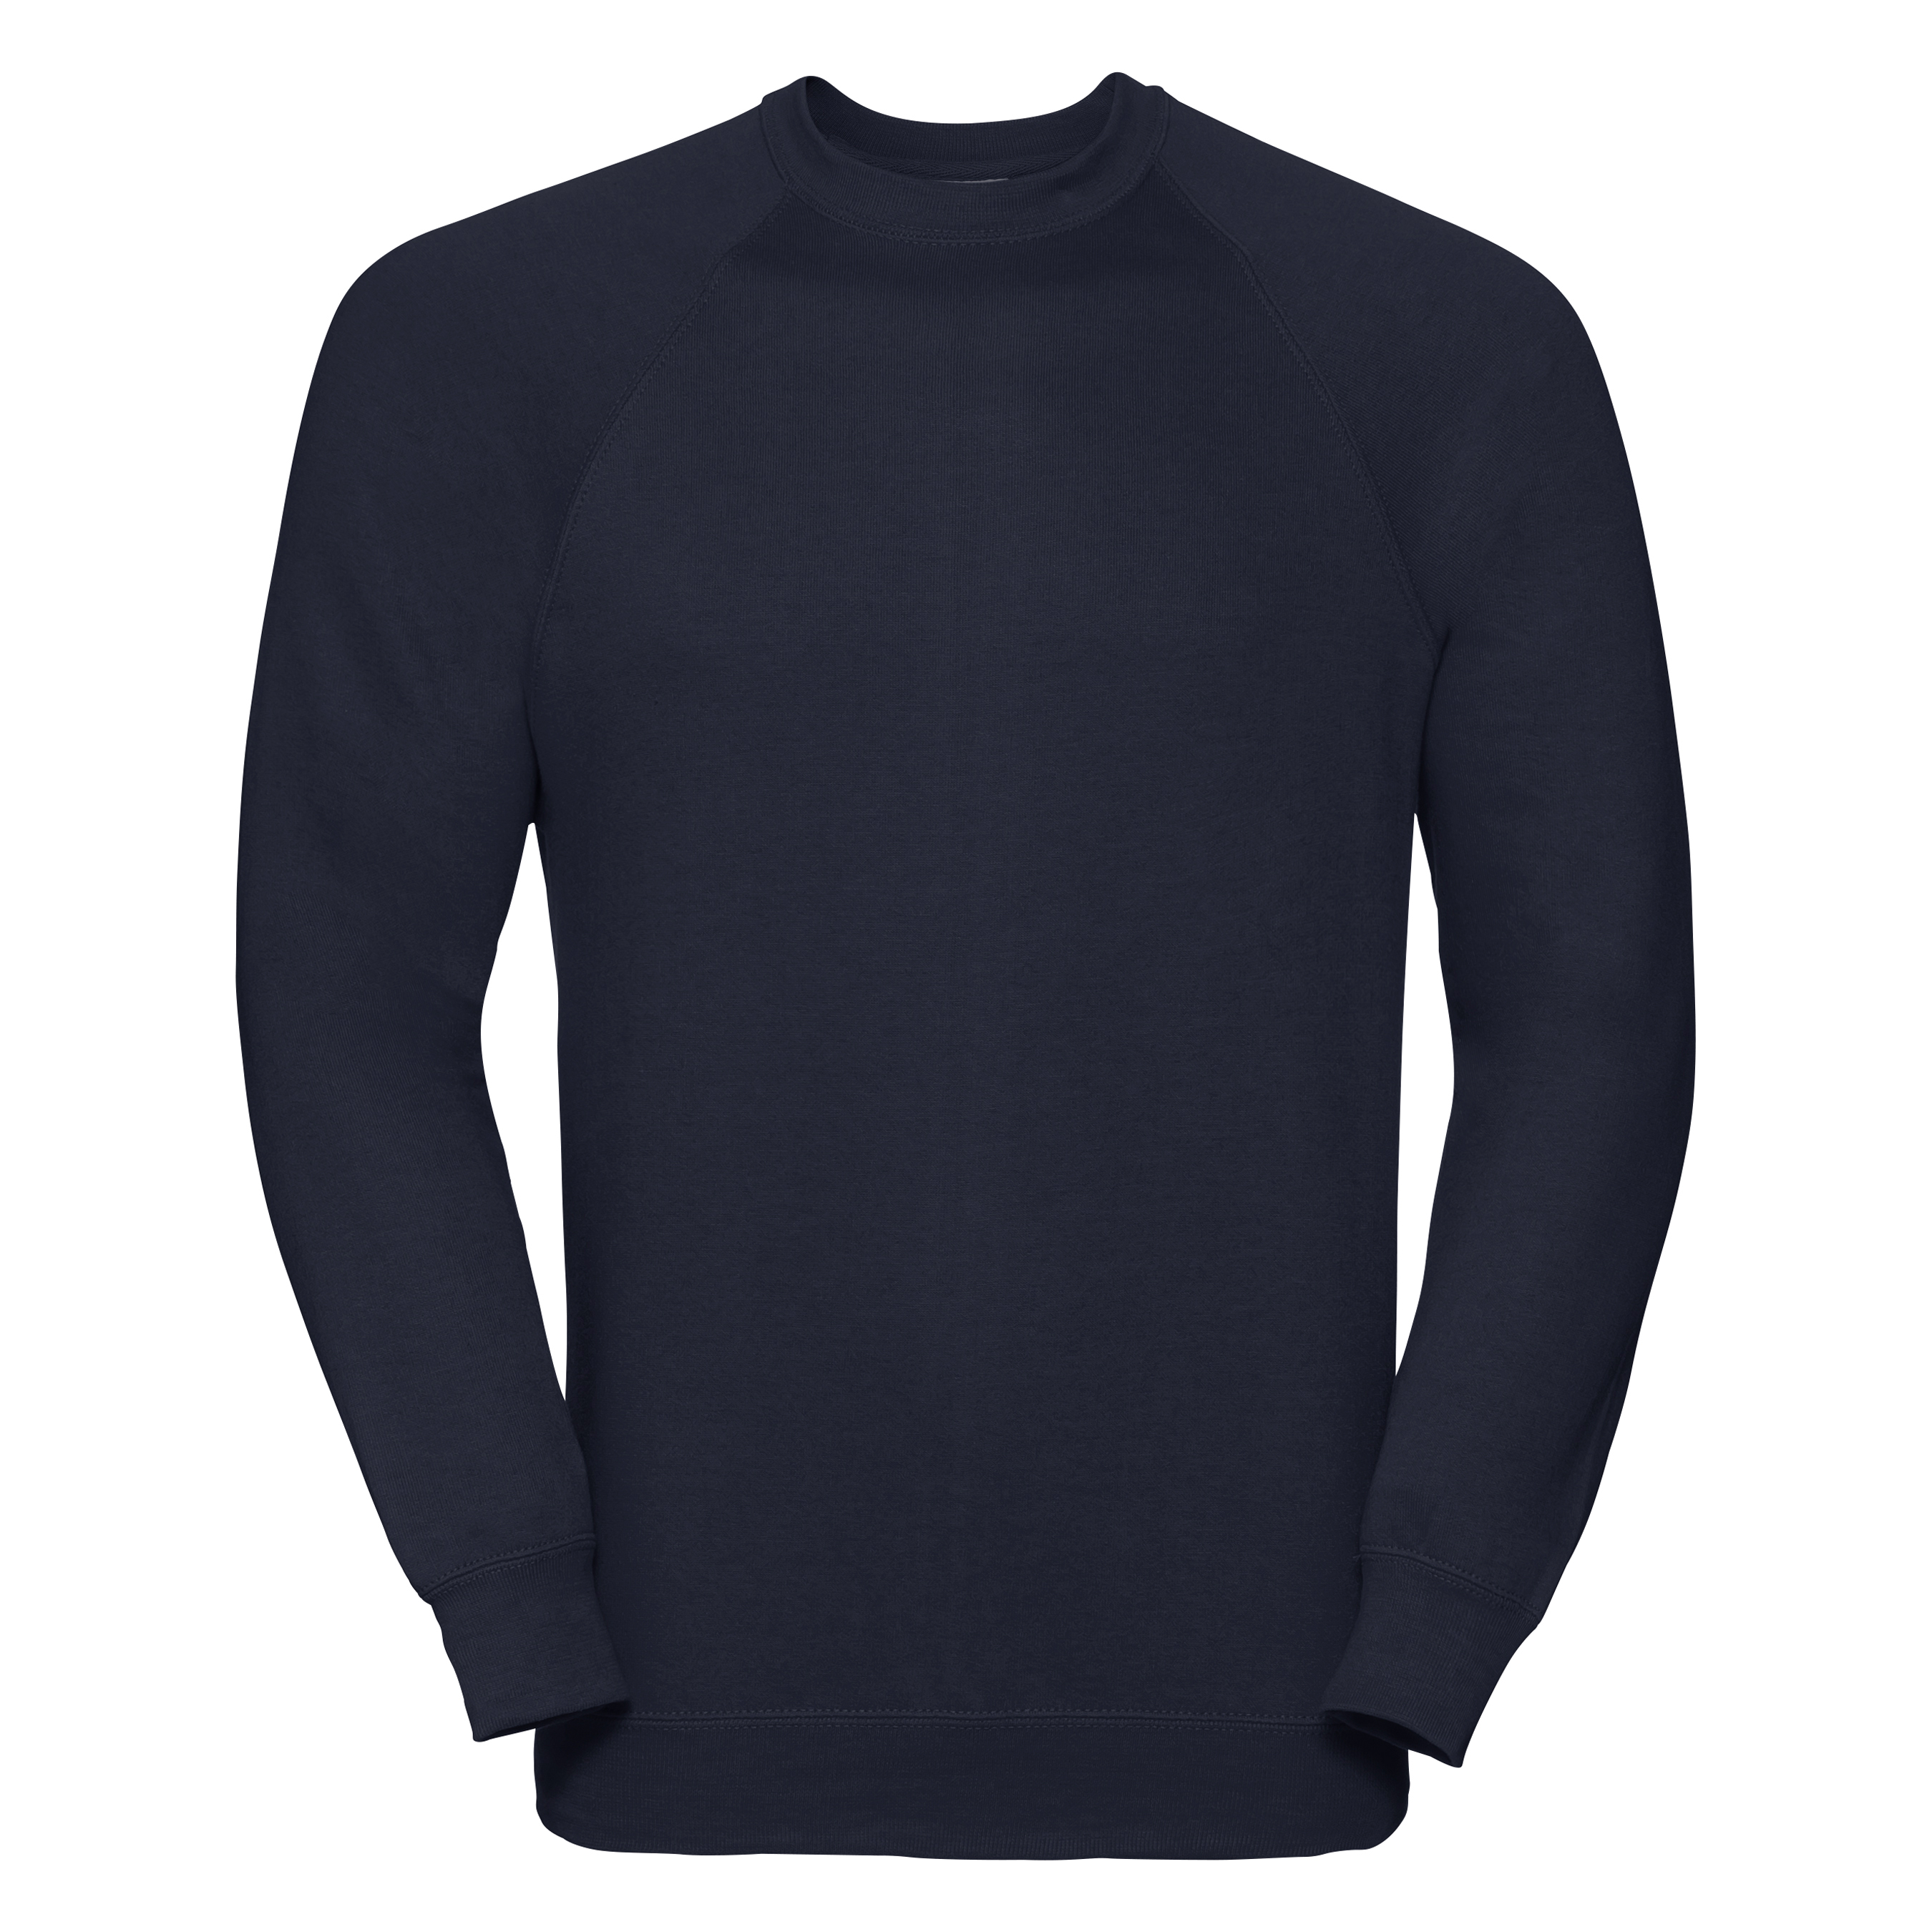 ax-httpswebsystems.s3.amazonaws.comtmp_for_downloadrussell-classic-sweatshirt-french-navy.jpg